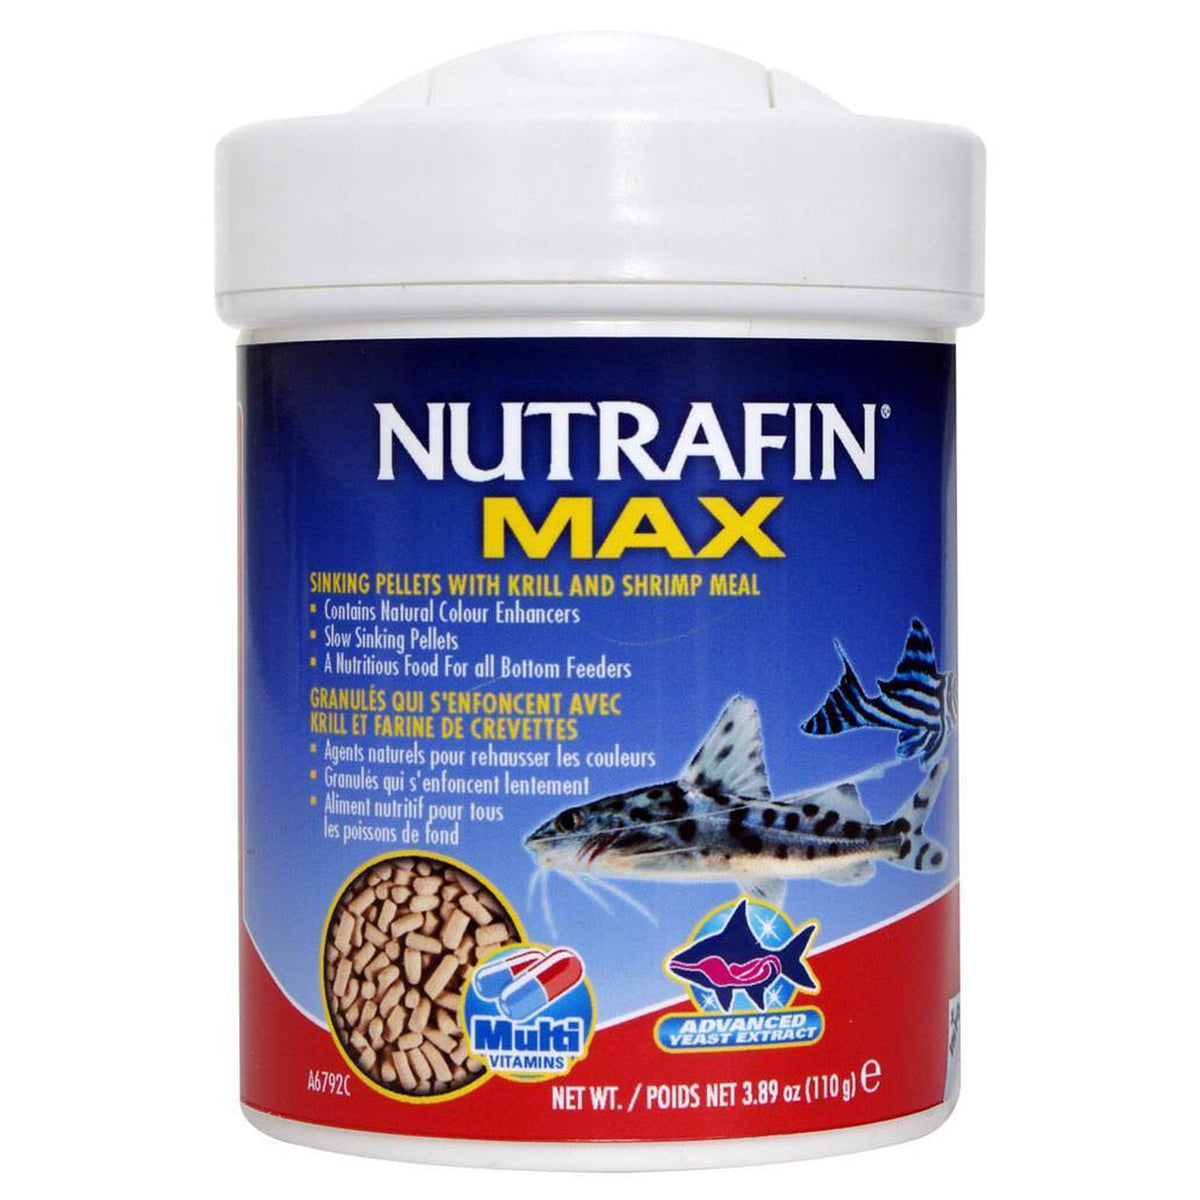 Nutrafin Max Sinking Pellets with Krill and Shrimp Meal